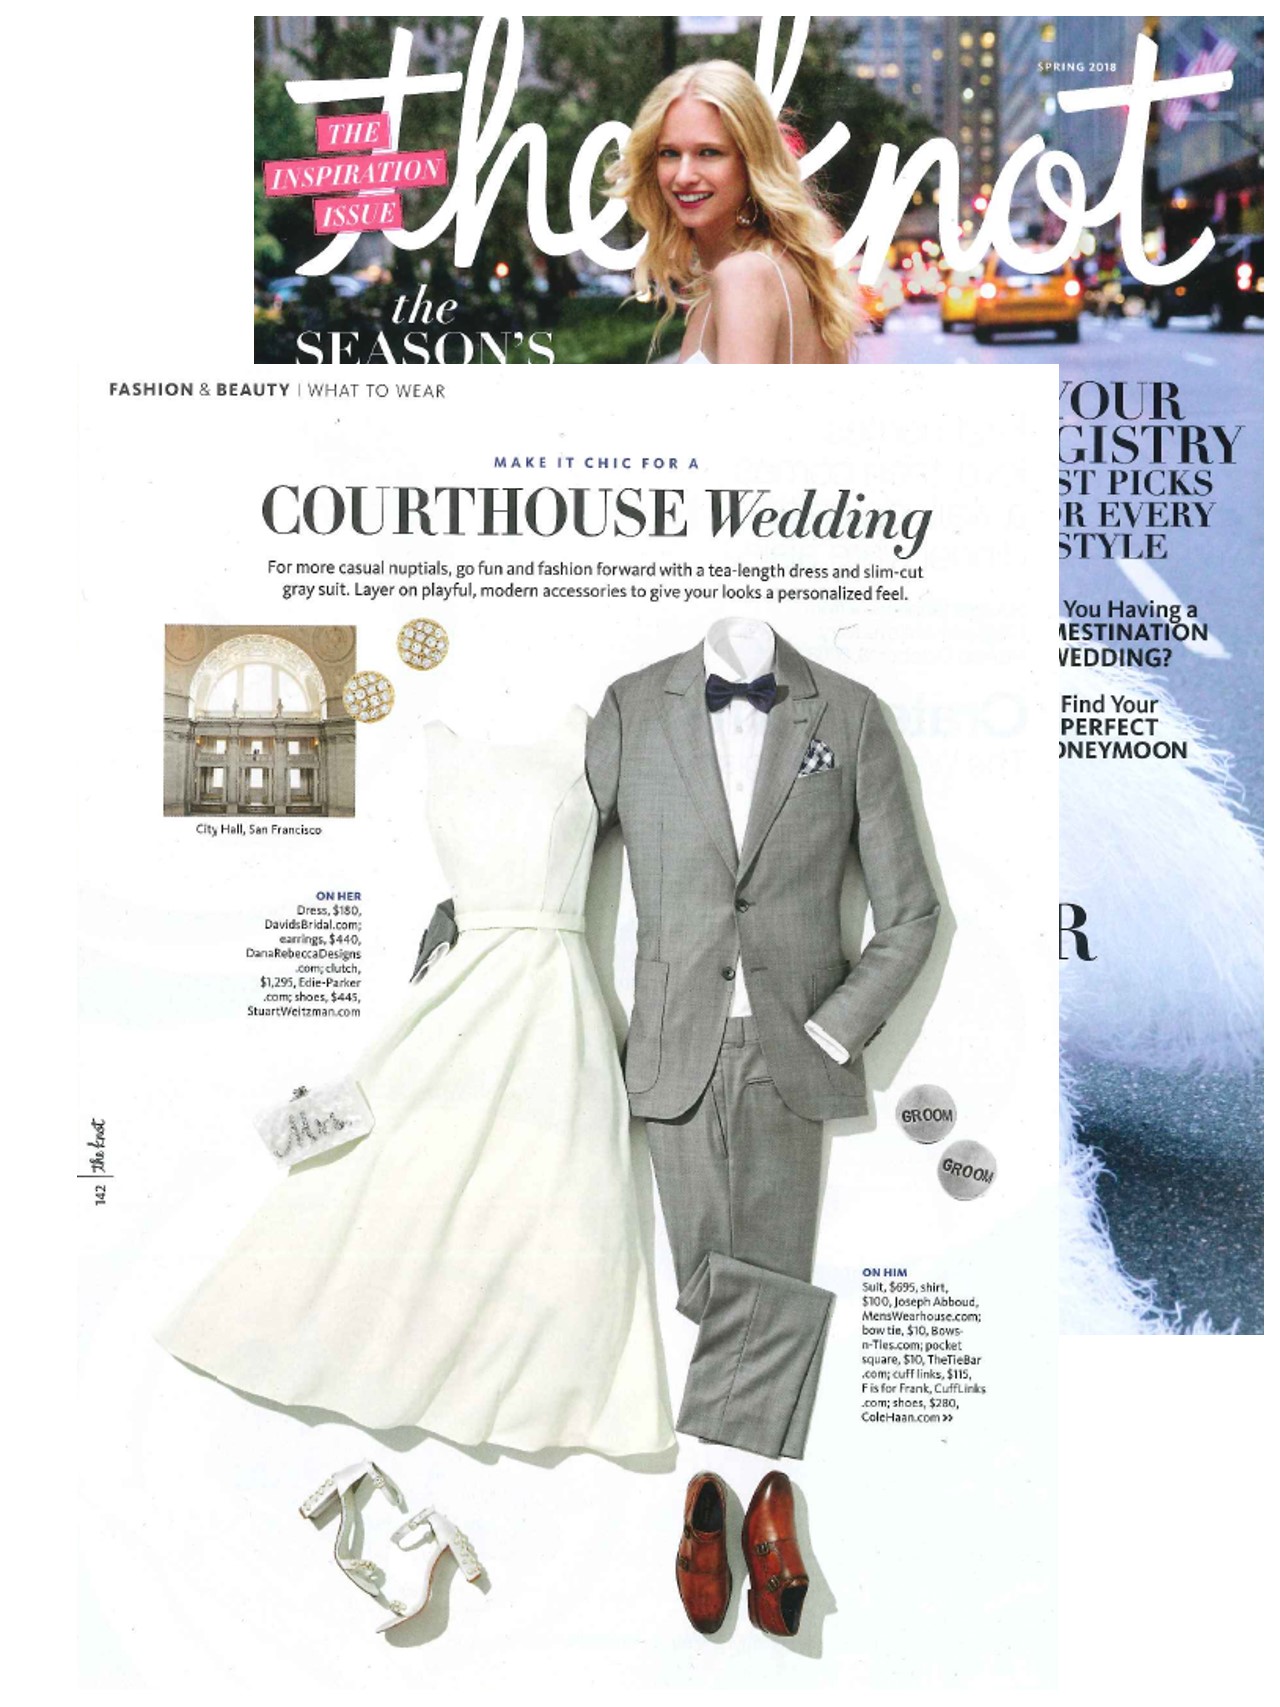 Courthouse Wedding Inspiration from The Knot's Spring 2018 Issue